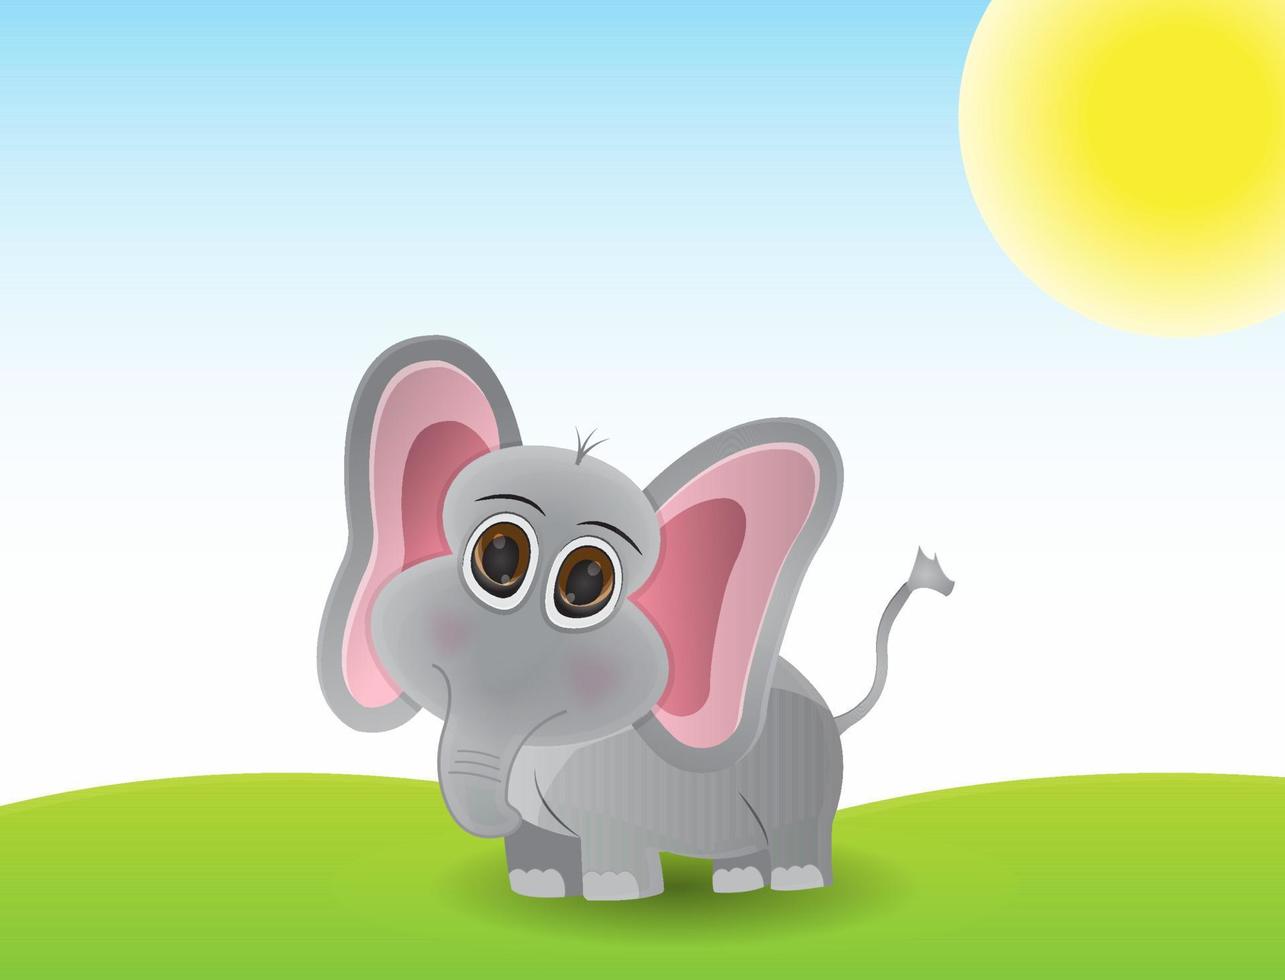 cartoon elephant in the middle of grass field under the sun vector